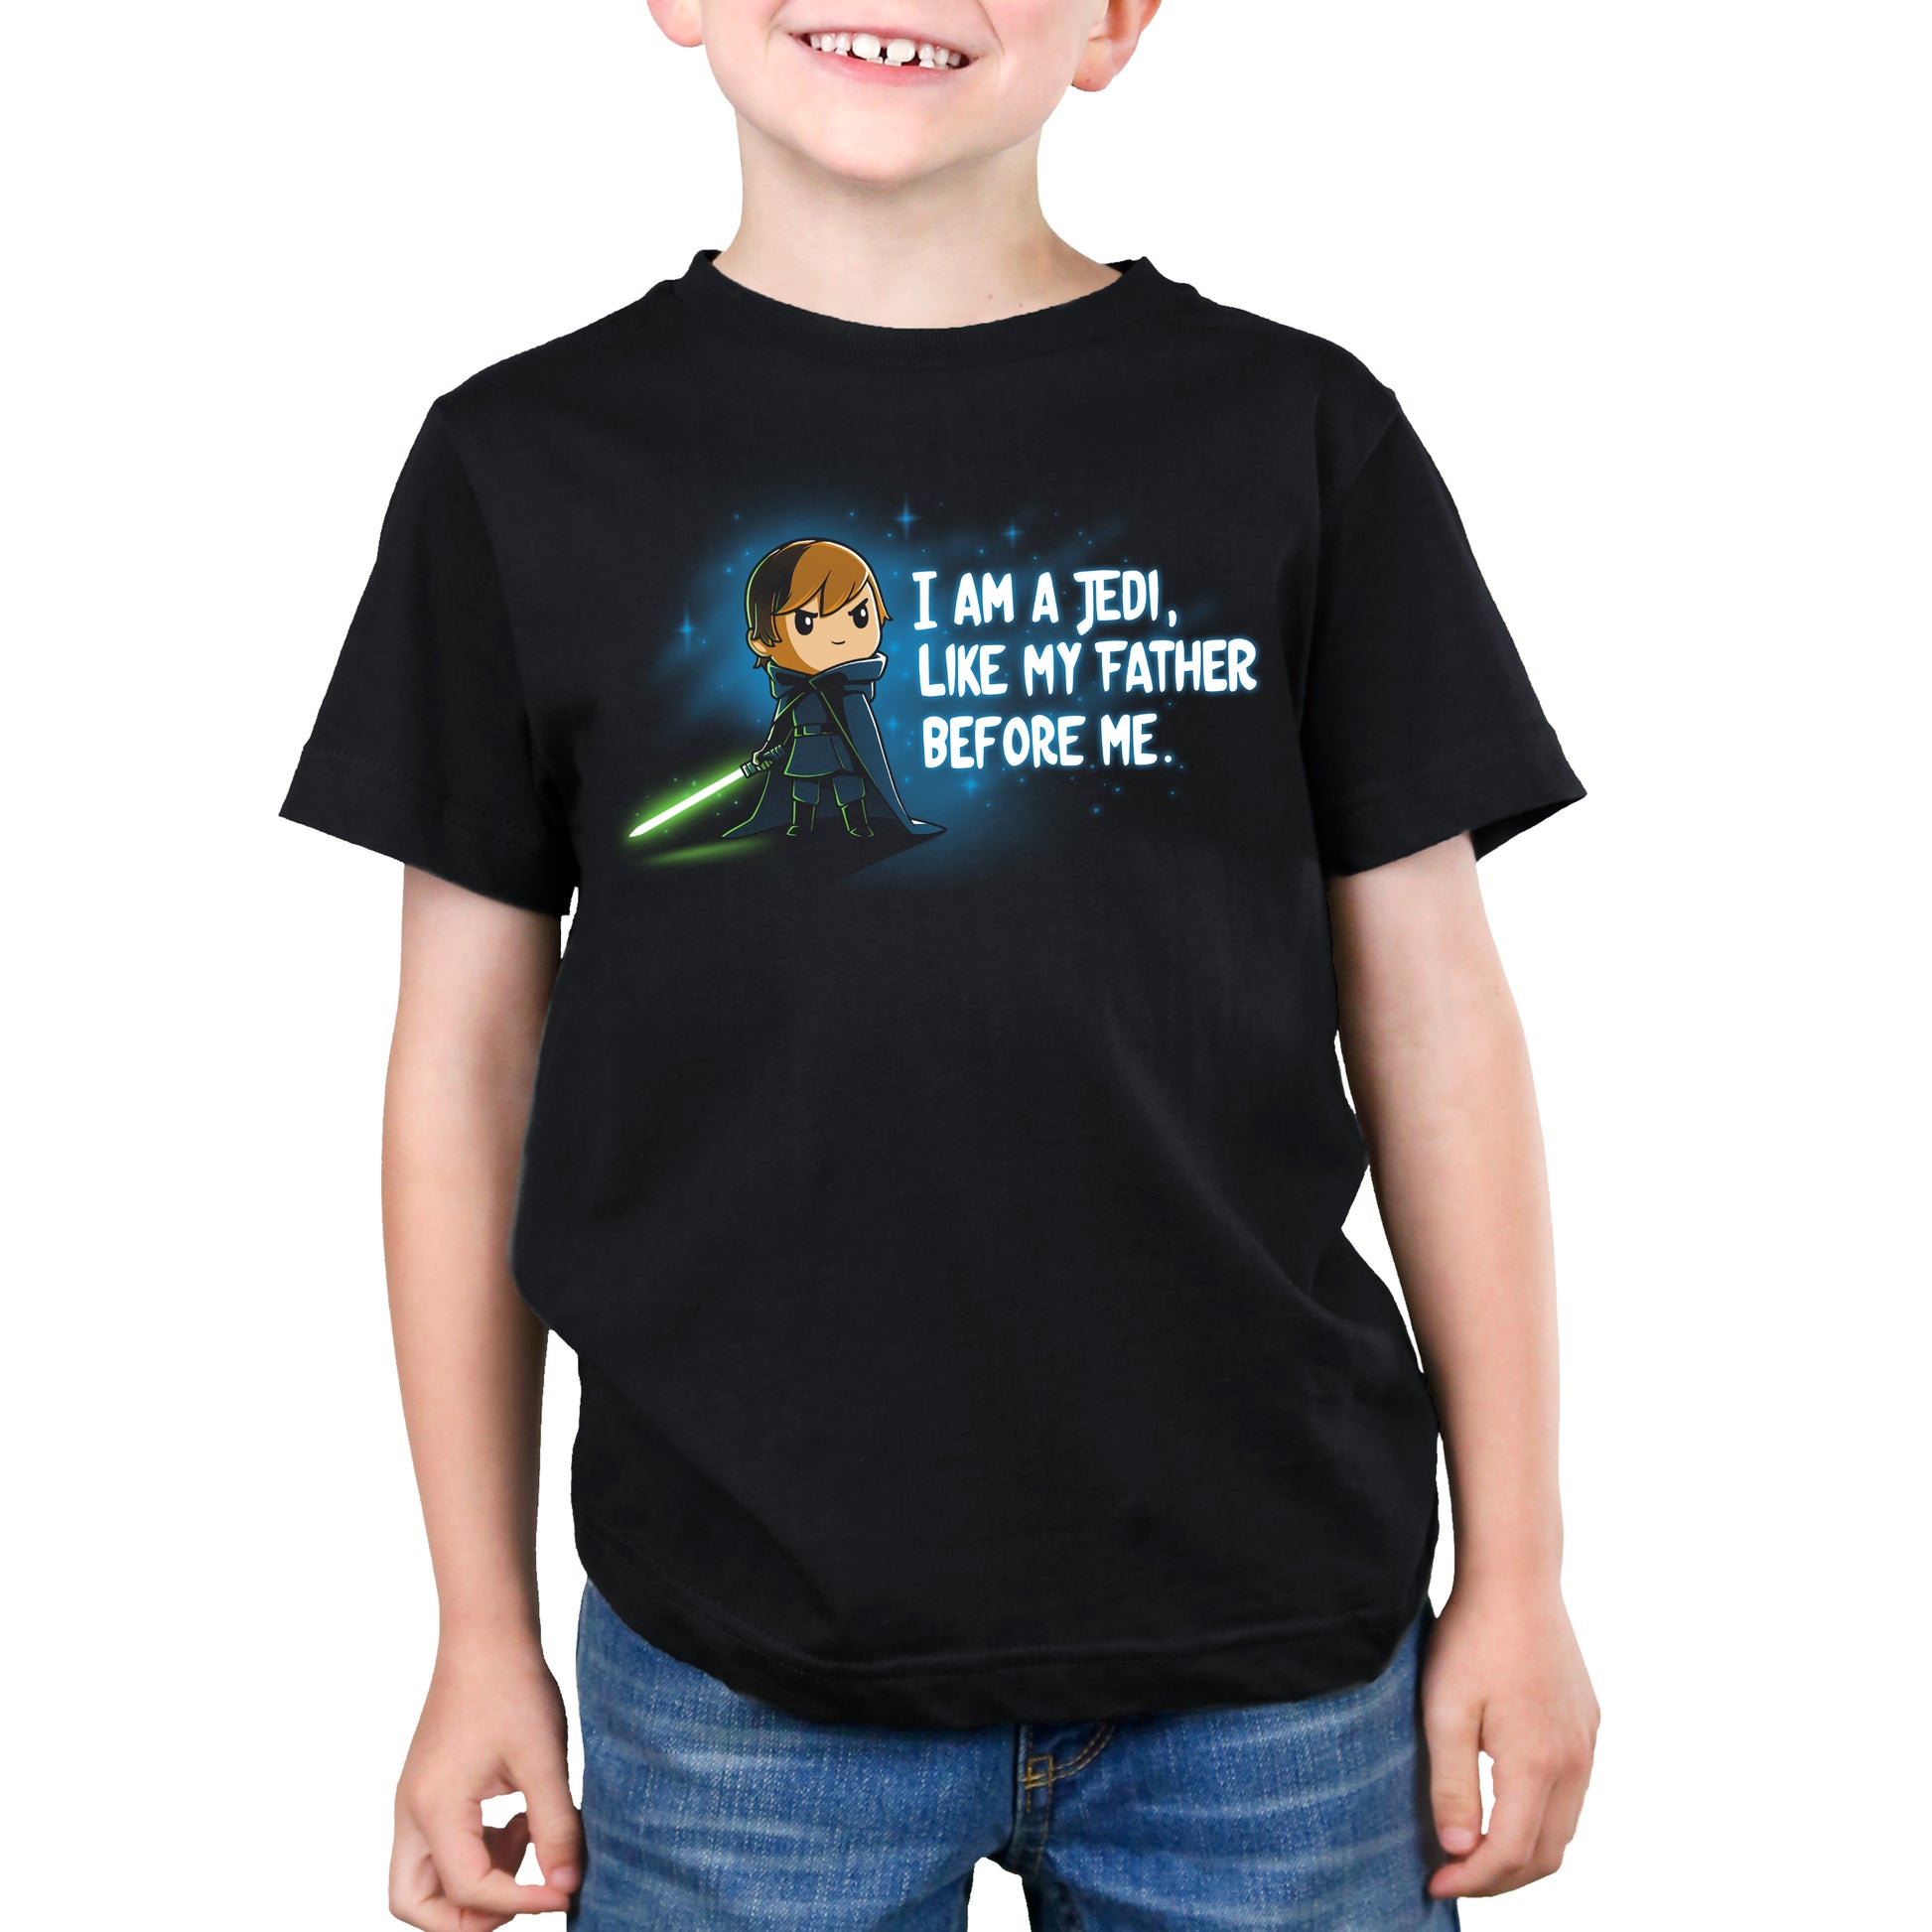 A boy wearing an officially licensed Star Wars t-shirt that says "I am a Jedi like my father.